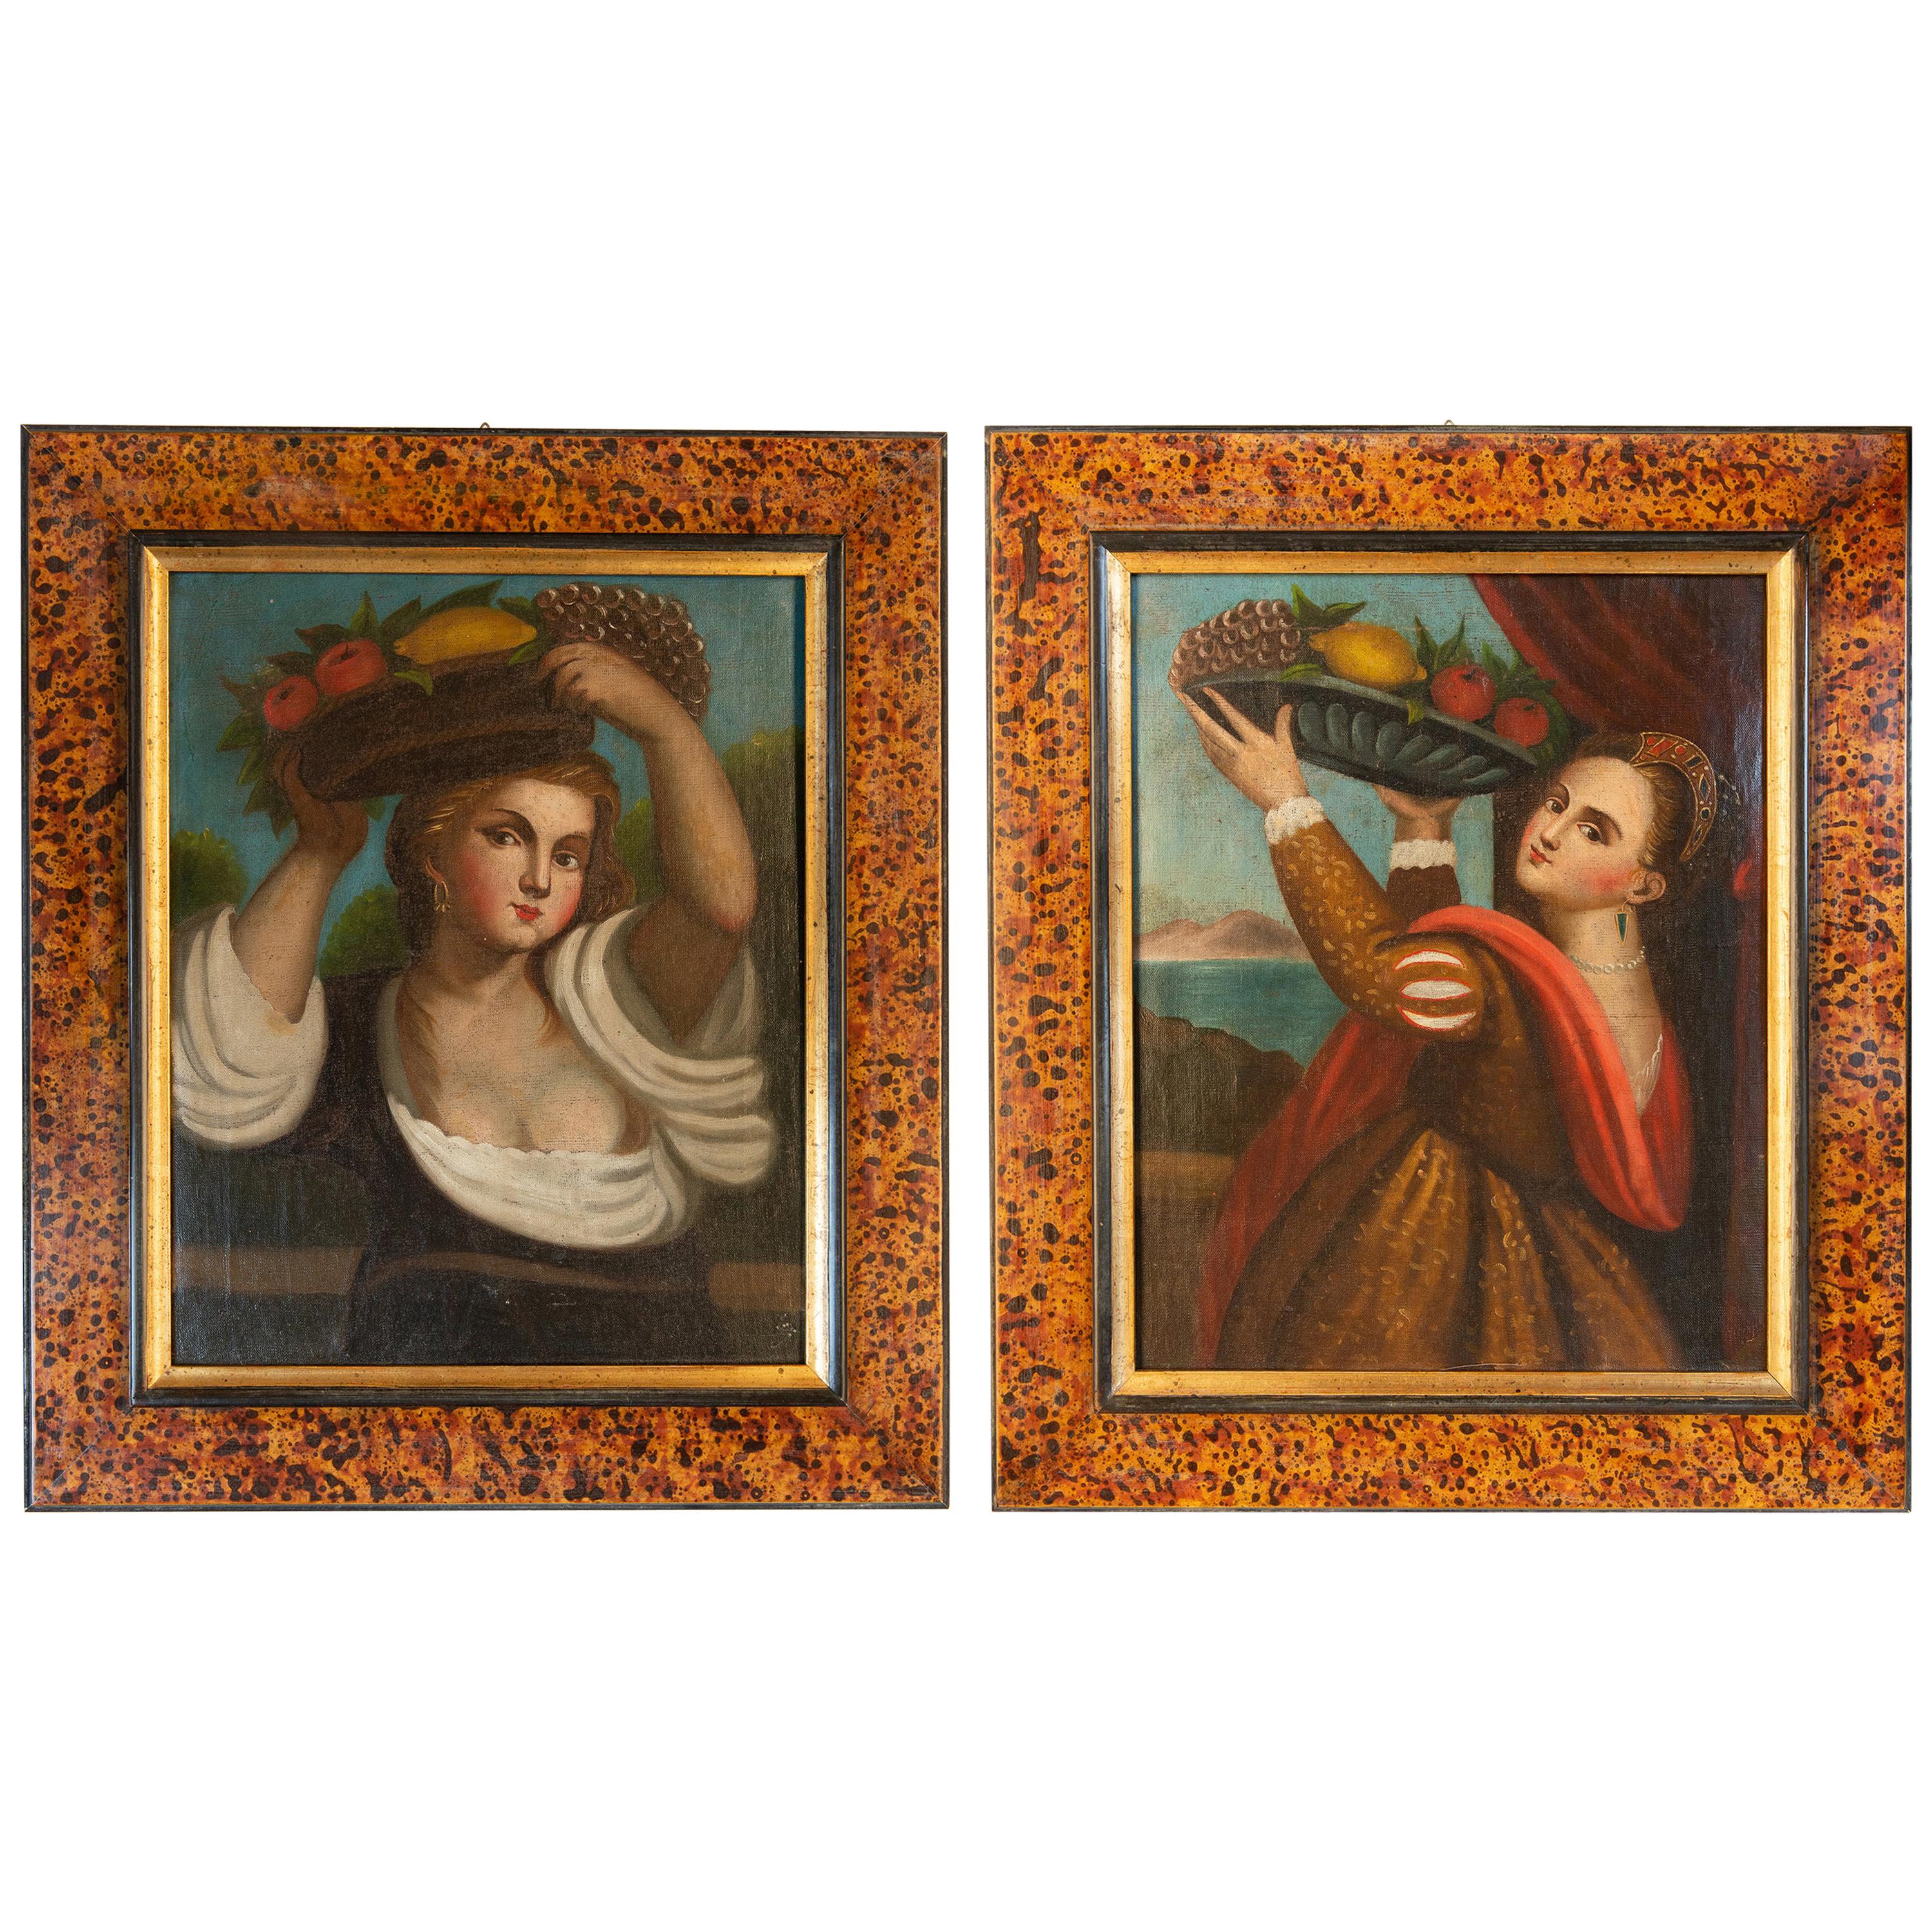 Pair of Old Paintings Reproducing "Lavinia from Tiziano"